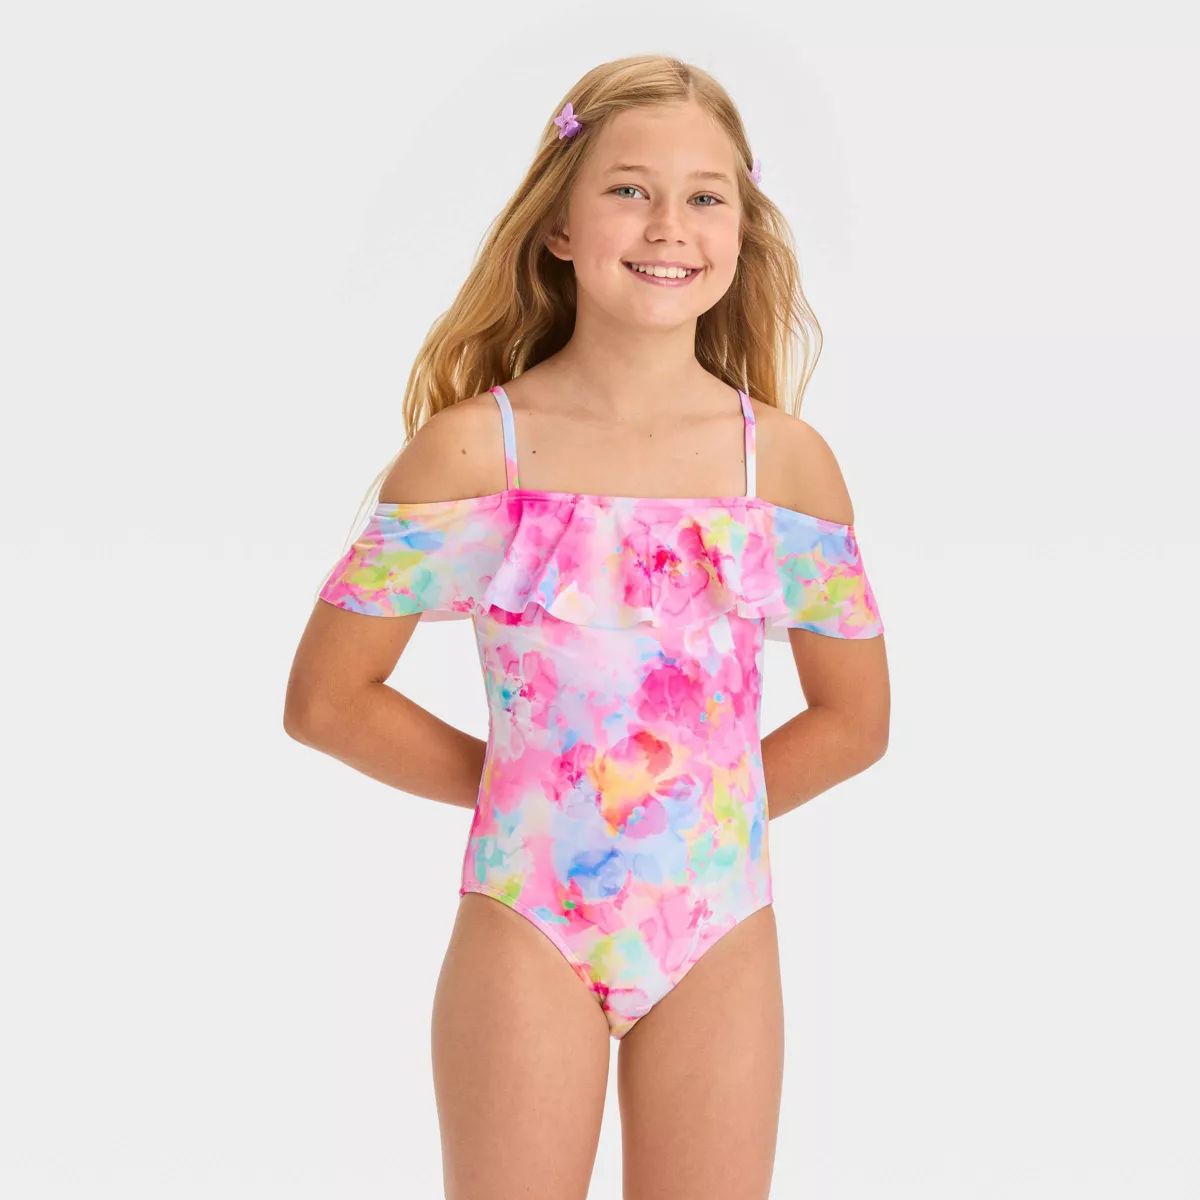 Girls' 'Flower Daydream' Floral Printed One Piece Swimsuit - Cat & Jack™ White/Pink | Target